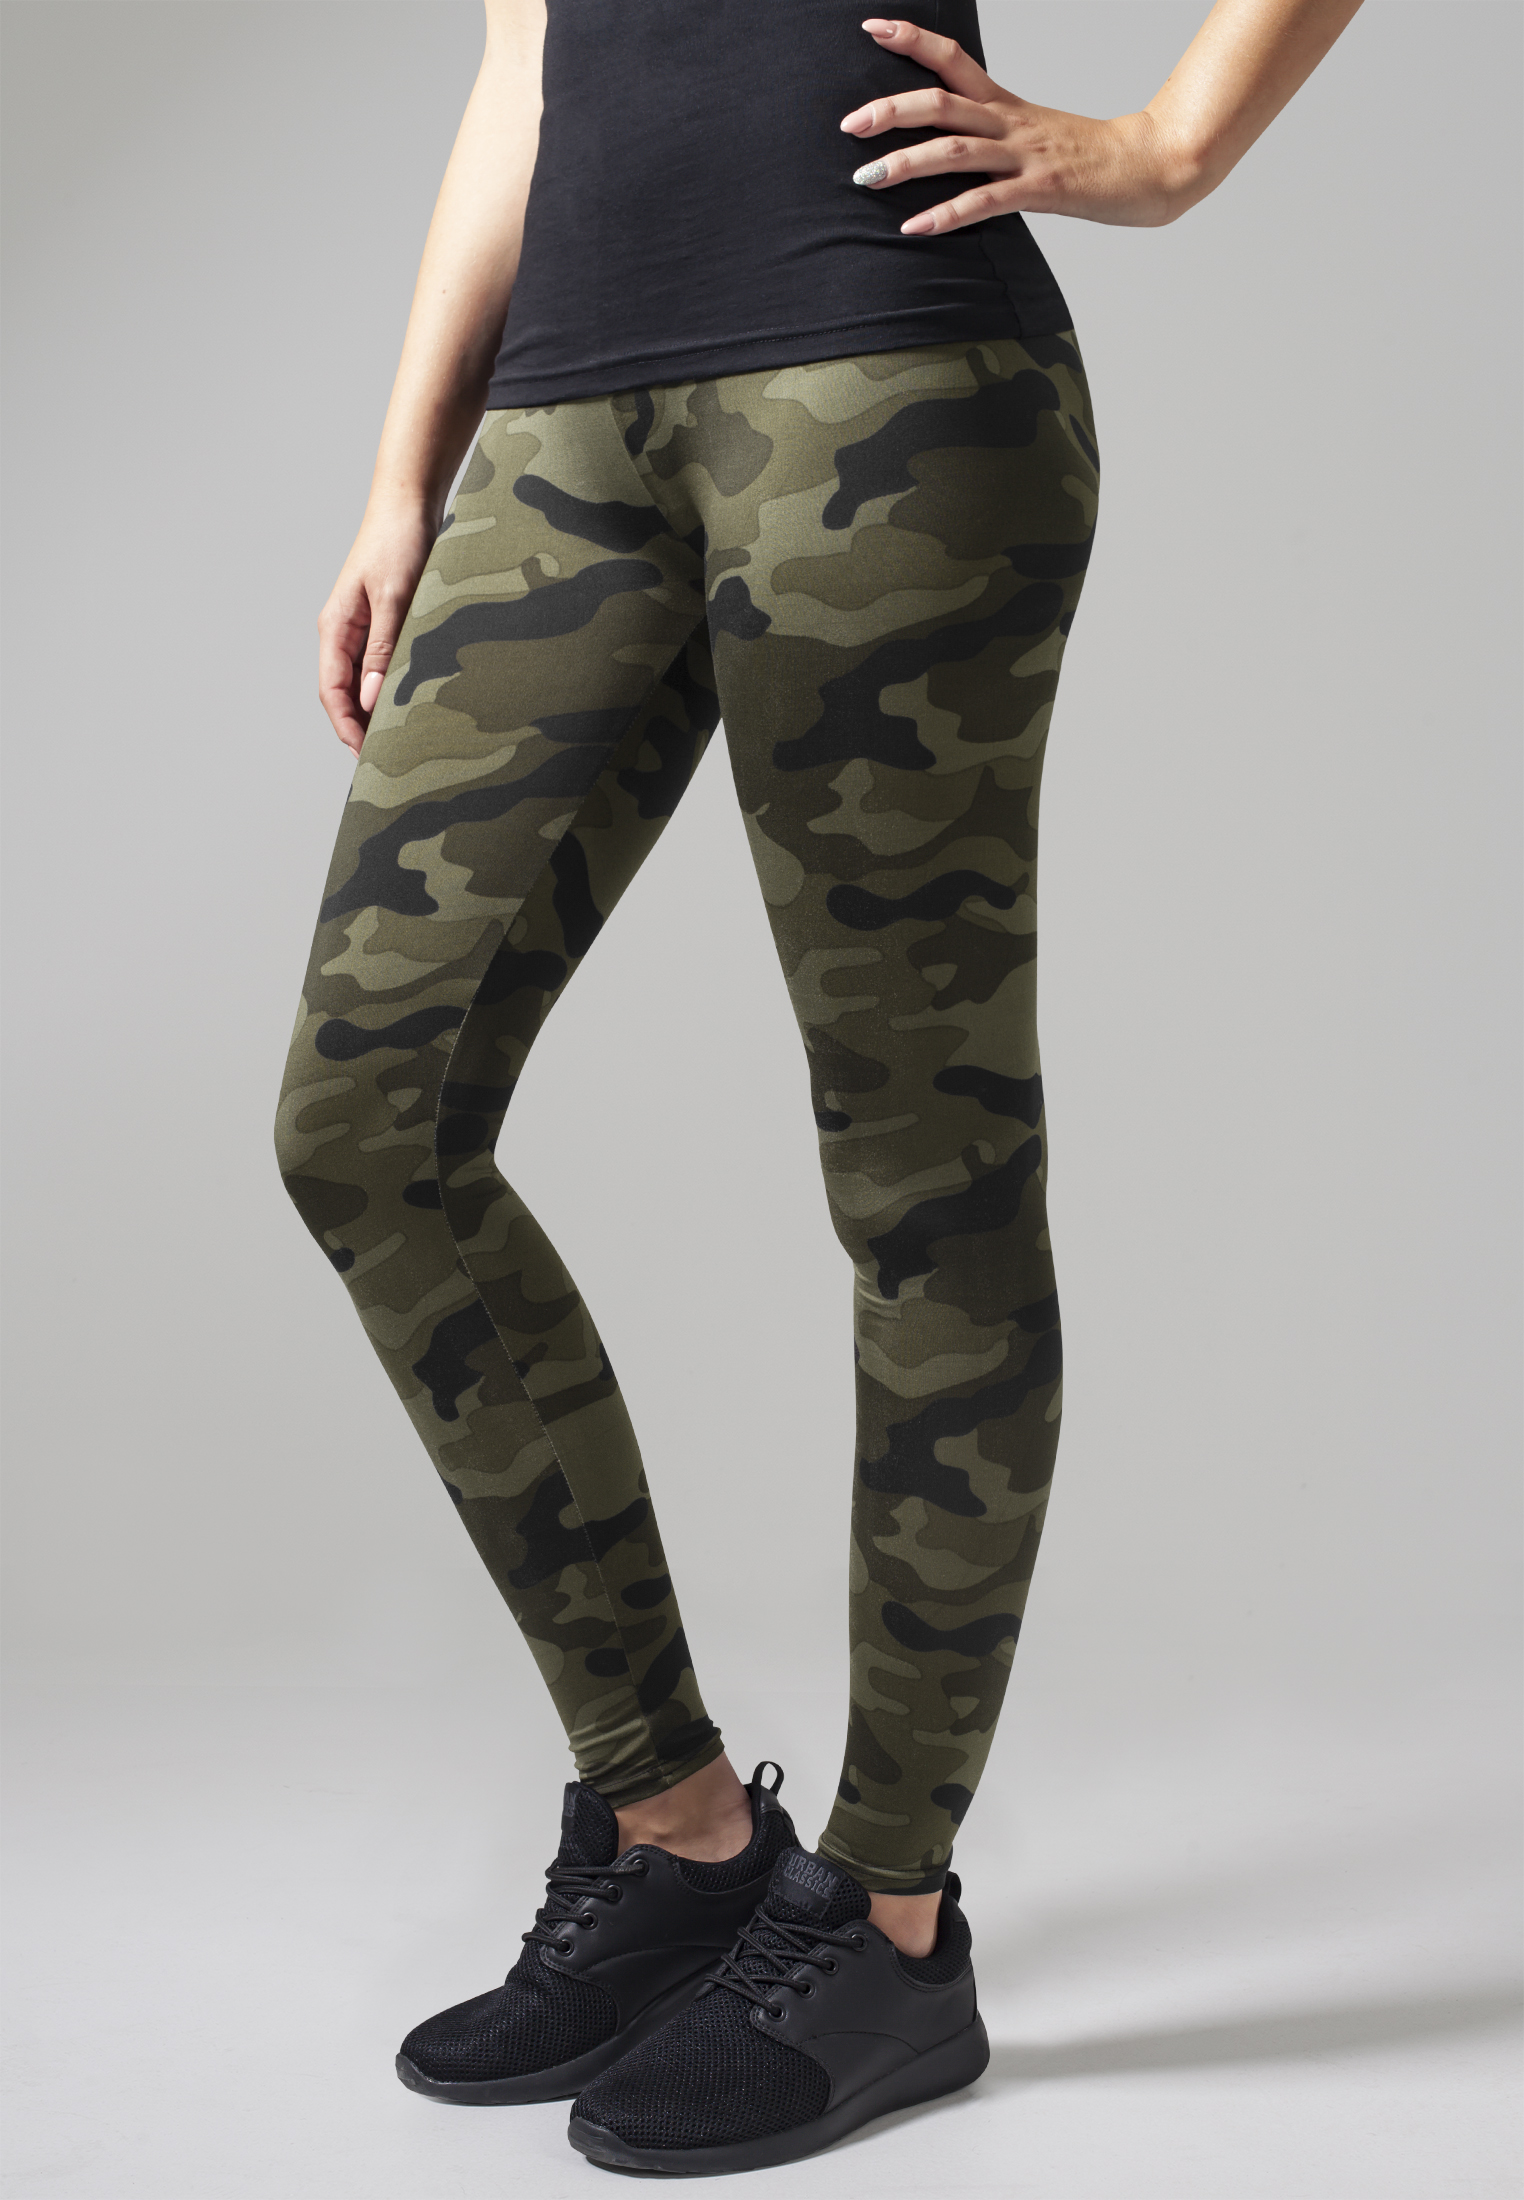 Women's camouflage leggings made of wood